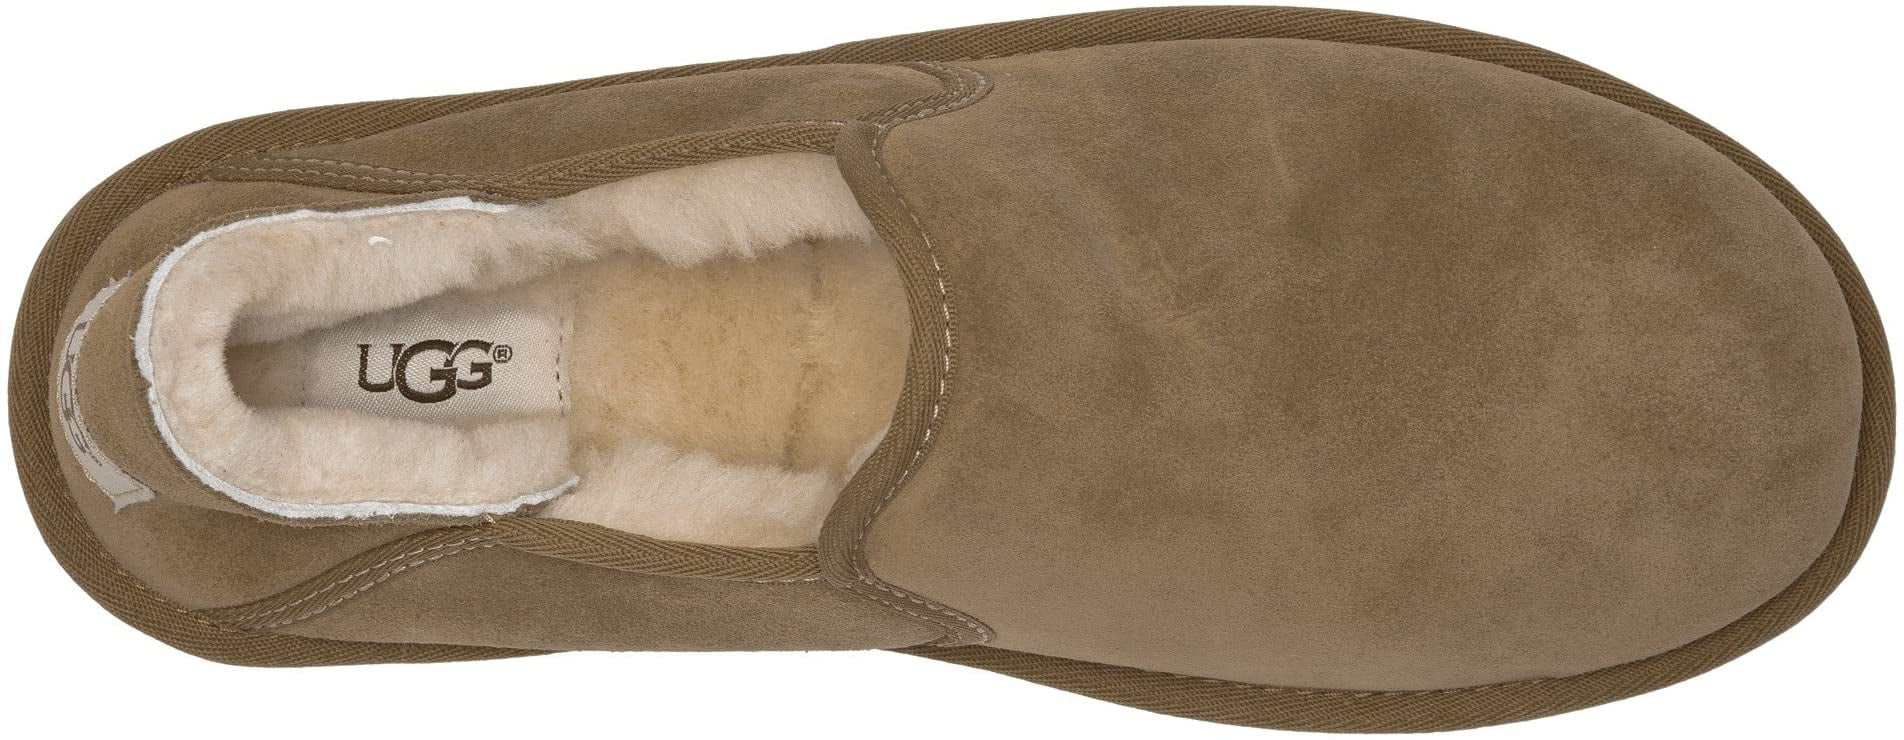 ugg slippers size 15